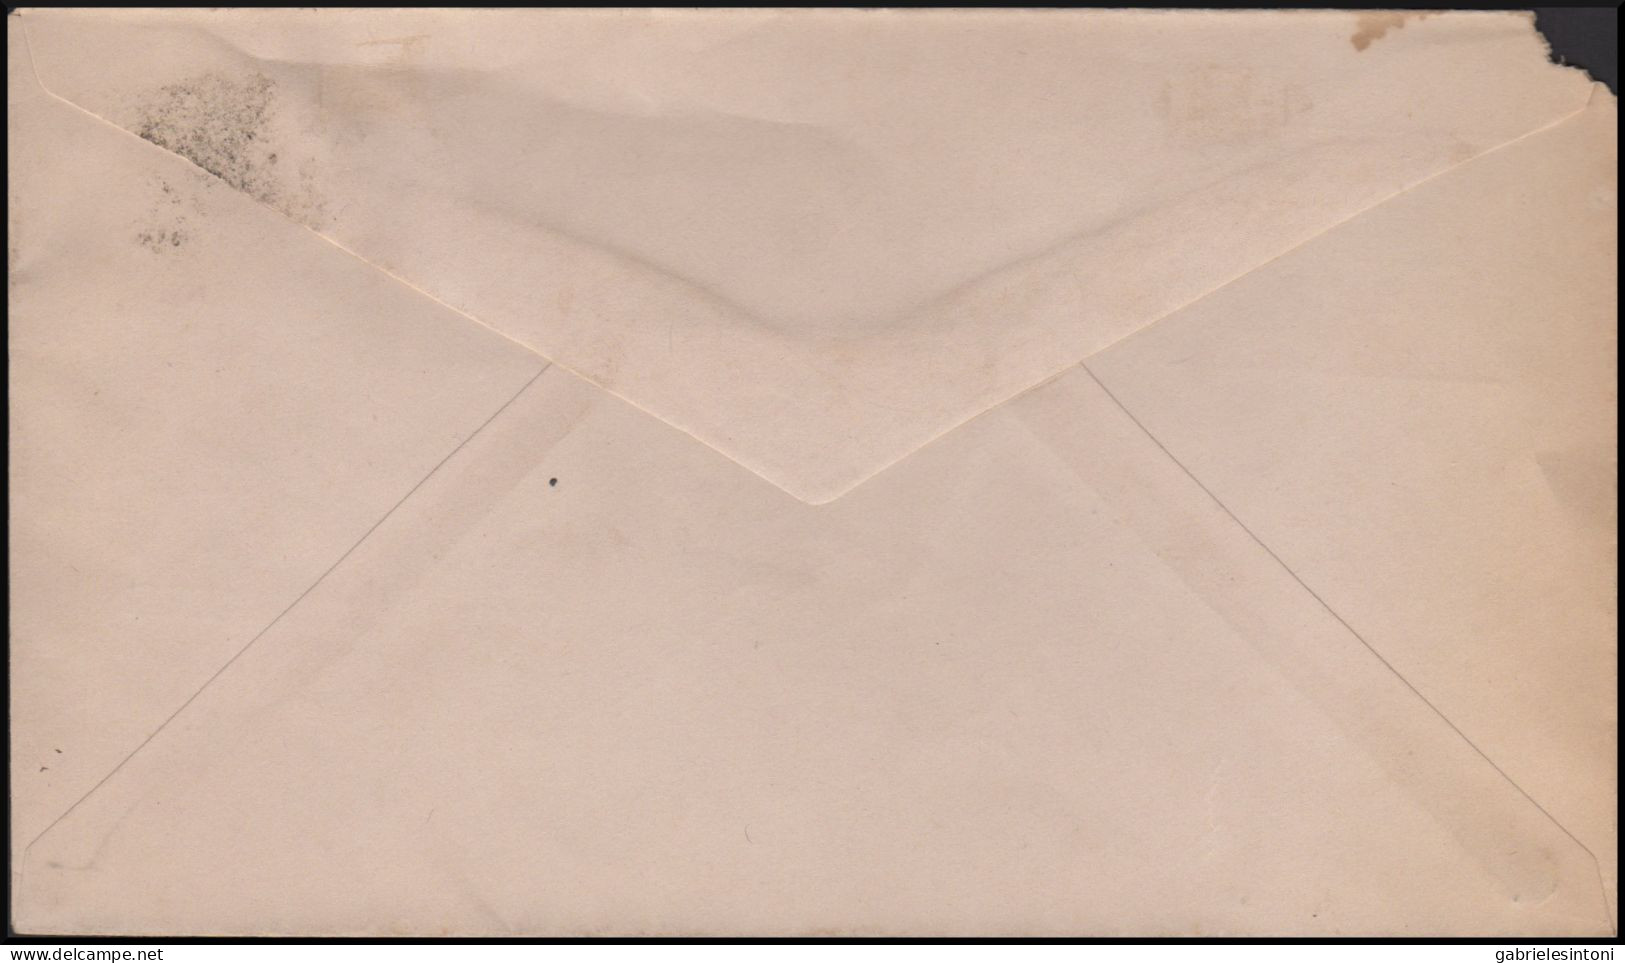 PM 11 - 1945 - Military Post. Three Air Mail Letter Sent From Burma To Rangoon. Japanese Occupation. - Occupazione Giapponese